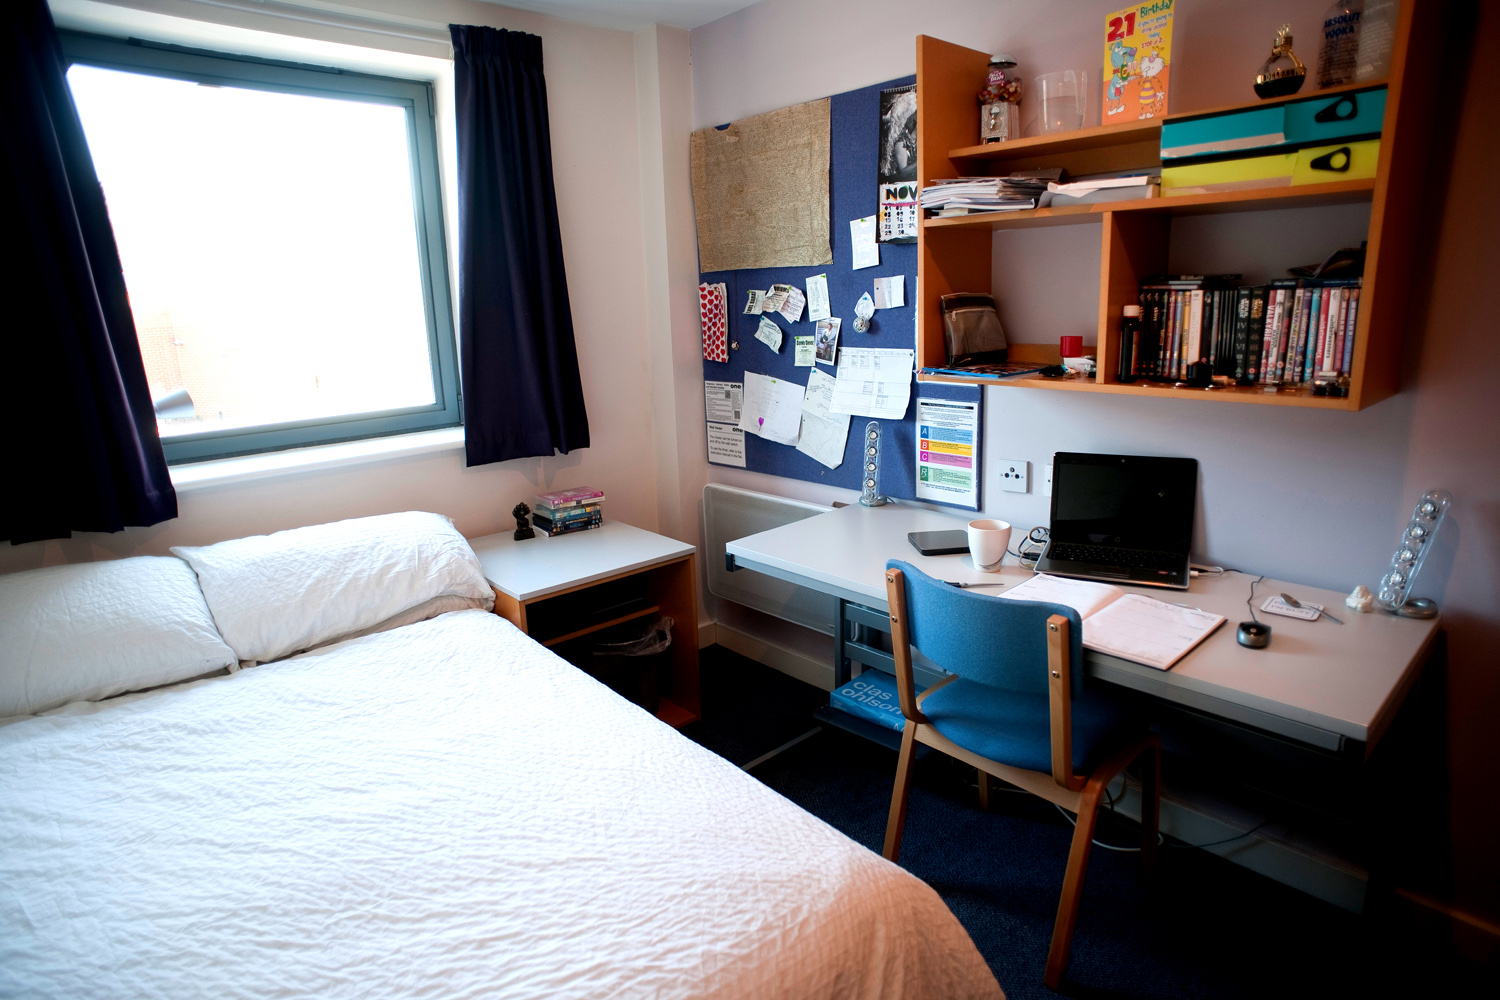 Mill street bedroom, double bed on the left, desk on the right, window in the background